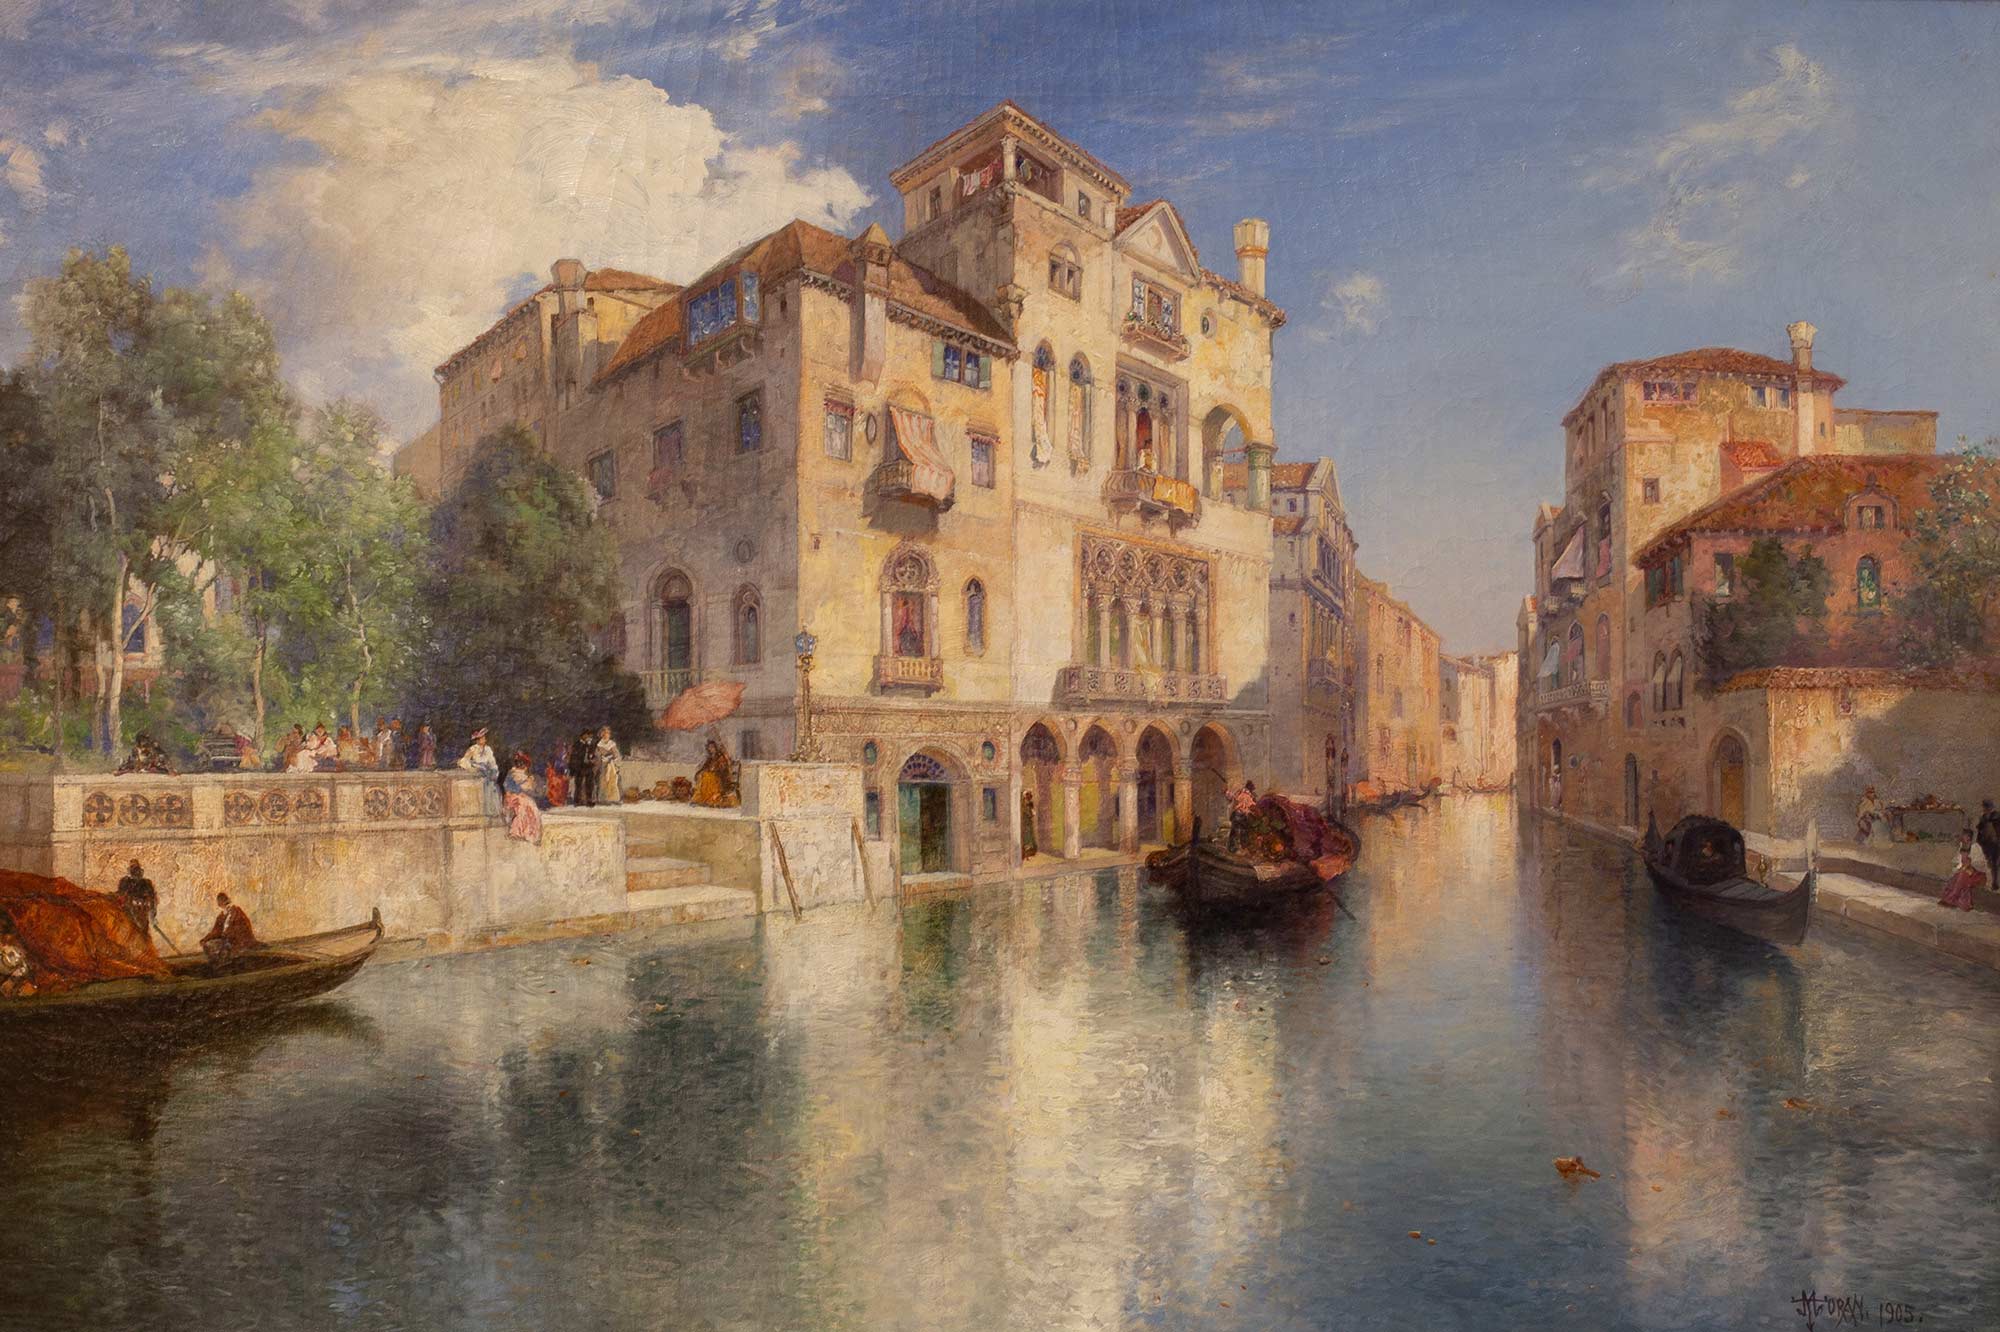 A painting of a river lined with buildings, with three gondolas on the water